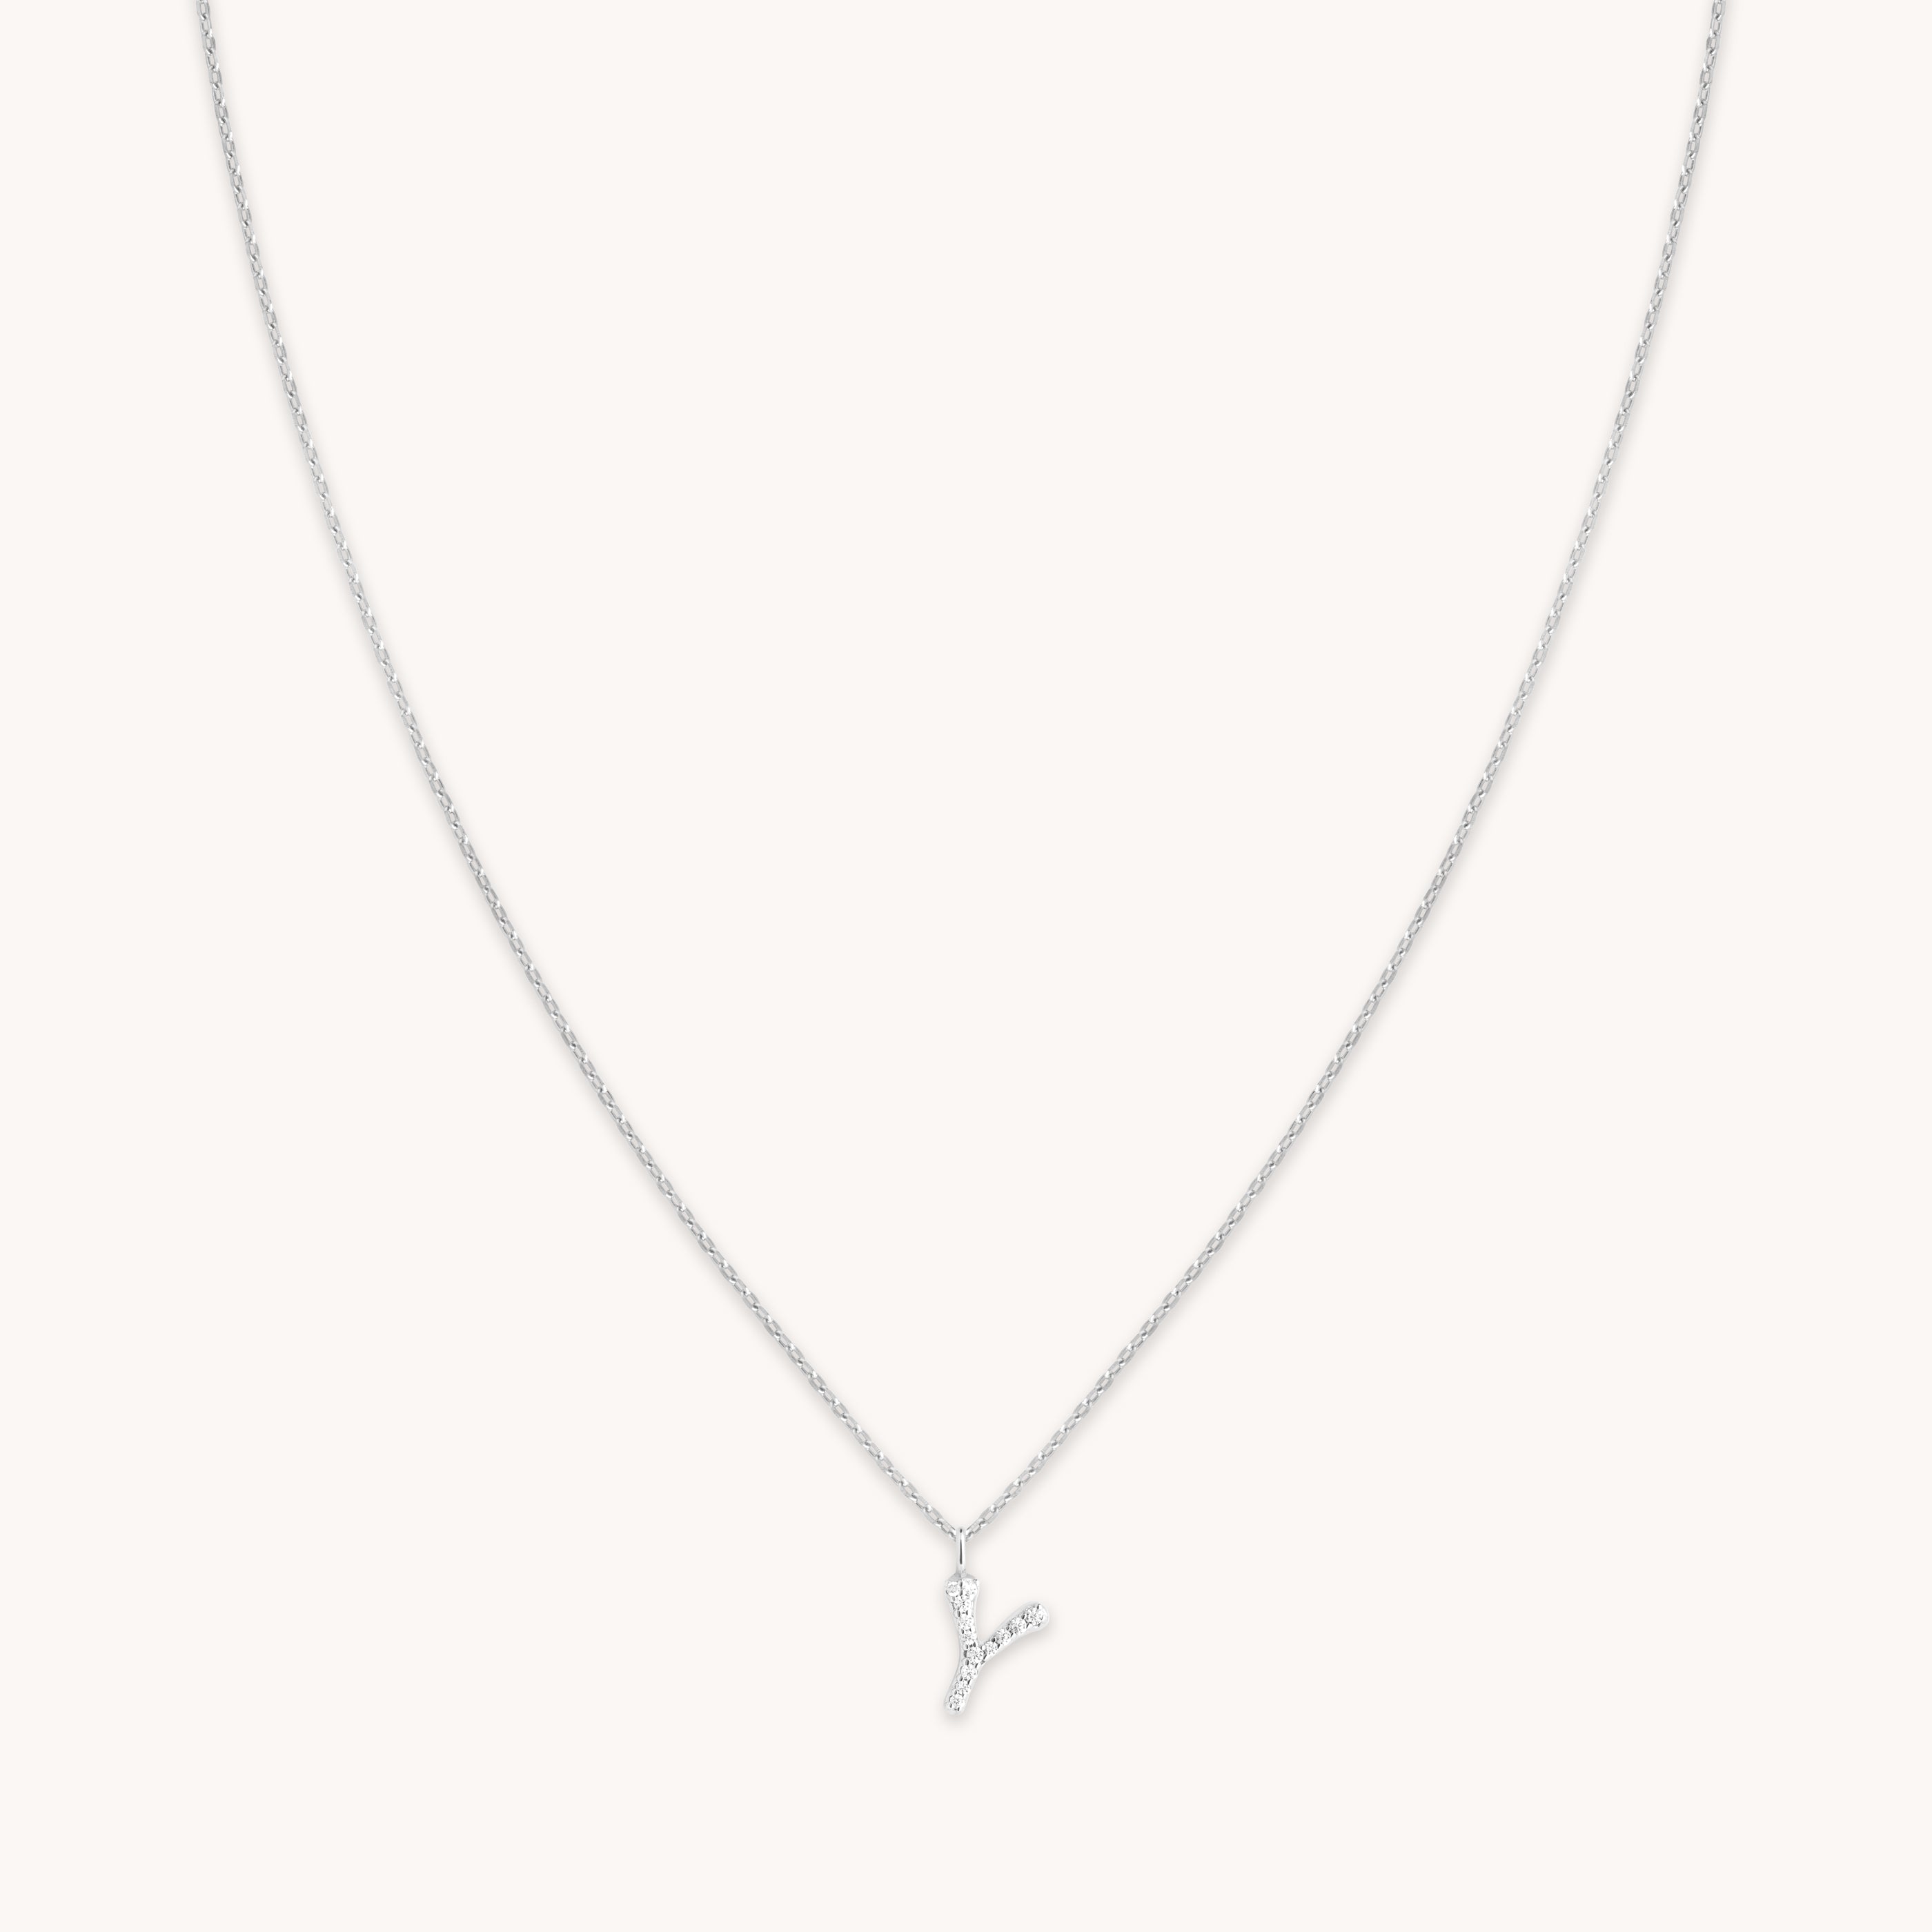 Y Initial Pavé Pendant Necklace in Silver